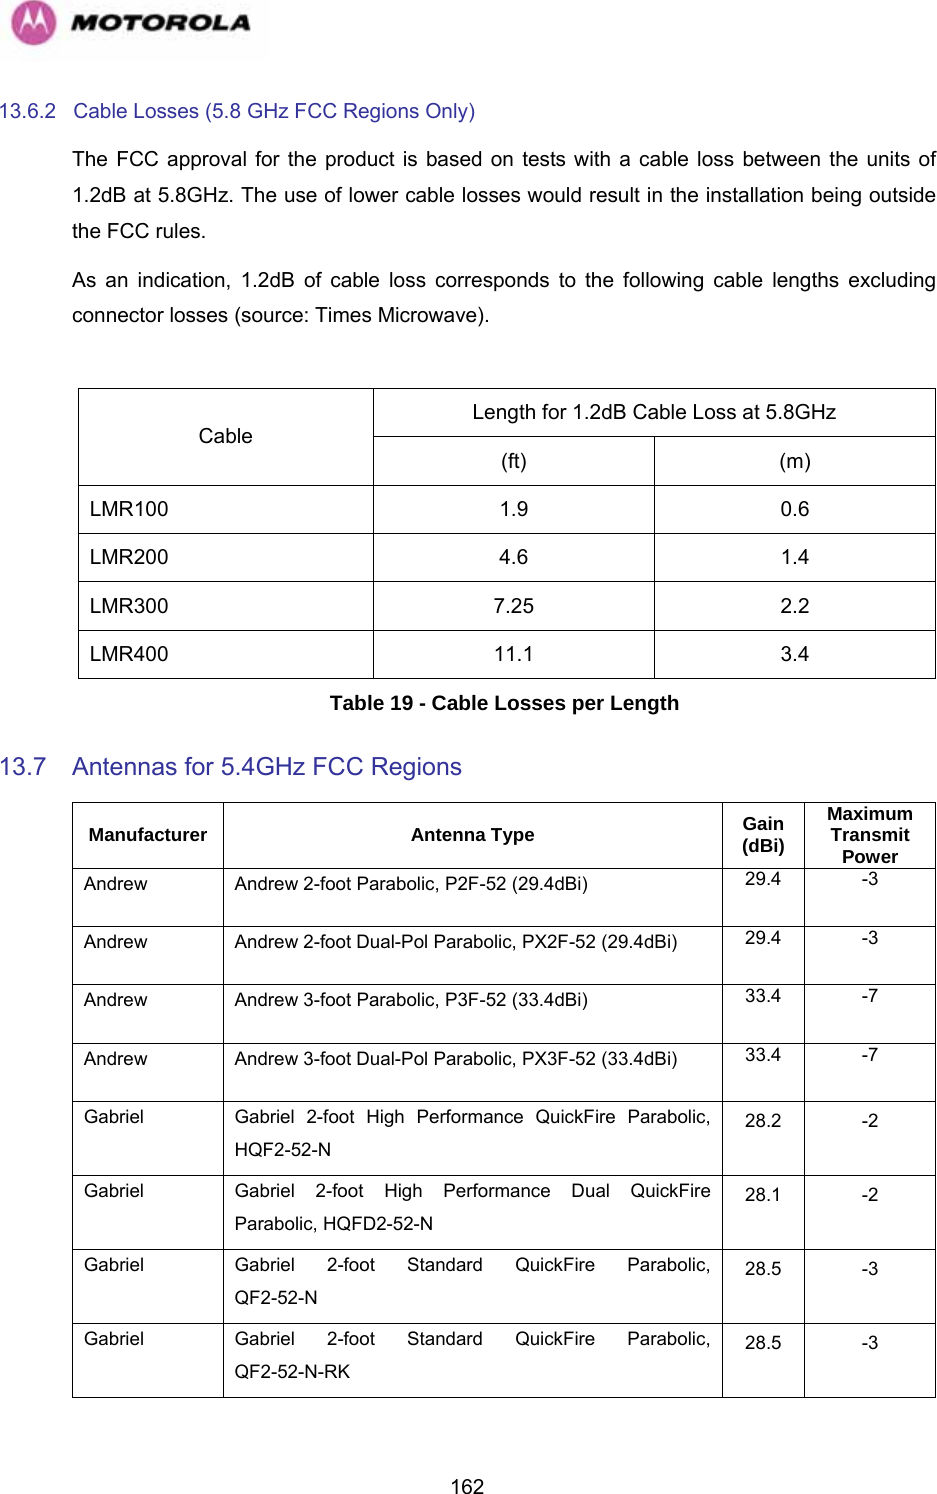   16213.6.2  Cable Losses (5.8 GHz FCC Regions Only) The FCC approval for the product is based on tests with a cable loss between the units of 1.2dB at 5.8GHz. The use of lower cable losses would result in the installation being outside the FCC rules. As an indication, 1.2dB of cable loss corresponds to the following cable lengths excluding connector losses (source: Times Microwave).  Length for 1.2dB Cable Loss at 5.8GHz Cable (ft) (m) LMR100 1.9 0.6 LMR200 4.6 1.4 LMR300 7.25 2.2 LMR400 11.1 3.4 Table 19 - Cable Losses per Length 13.7  Antennas for 5.4GHz FCC Regions Manufacturer Antenna Type  Gain (dBi) Maximum Transmit Power Andrew  Andrew 2-foot Parabolic, P2F-52 (29.4dBi)  29.4 -3 Andrew  Andrew 2-foot Dual-Pol Parabolic, PX2F-52 (29.4dBi)  29.4 -3 Andrew  Andrew 3-foot Parabolic, P3F-52 (33.4dBi)  33.4 -7 Andrew  Andrew 3-foot Dual-Pol Parabolic, PX3F-52 (33.4dBi)  33.4 -7 Gabriel  Gabriel 2-foot High Performance QuickFire Parabolic, HQF2-52-N 28.2 -2 Gabriel  Gabriel 2-foot High Performance Dual QuickFire Parabolic, HQFD2-52-N 28.1 -2 Gabriel  Gabriel 2-foot Standard QuickFire Parabolic,  QF2-52-N 28.5 -3 Gabriel  Gabriel 2-foot Standard QuickFire Parabolic,  QF2-52-N-RK 28.5 -3 